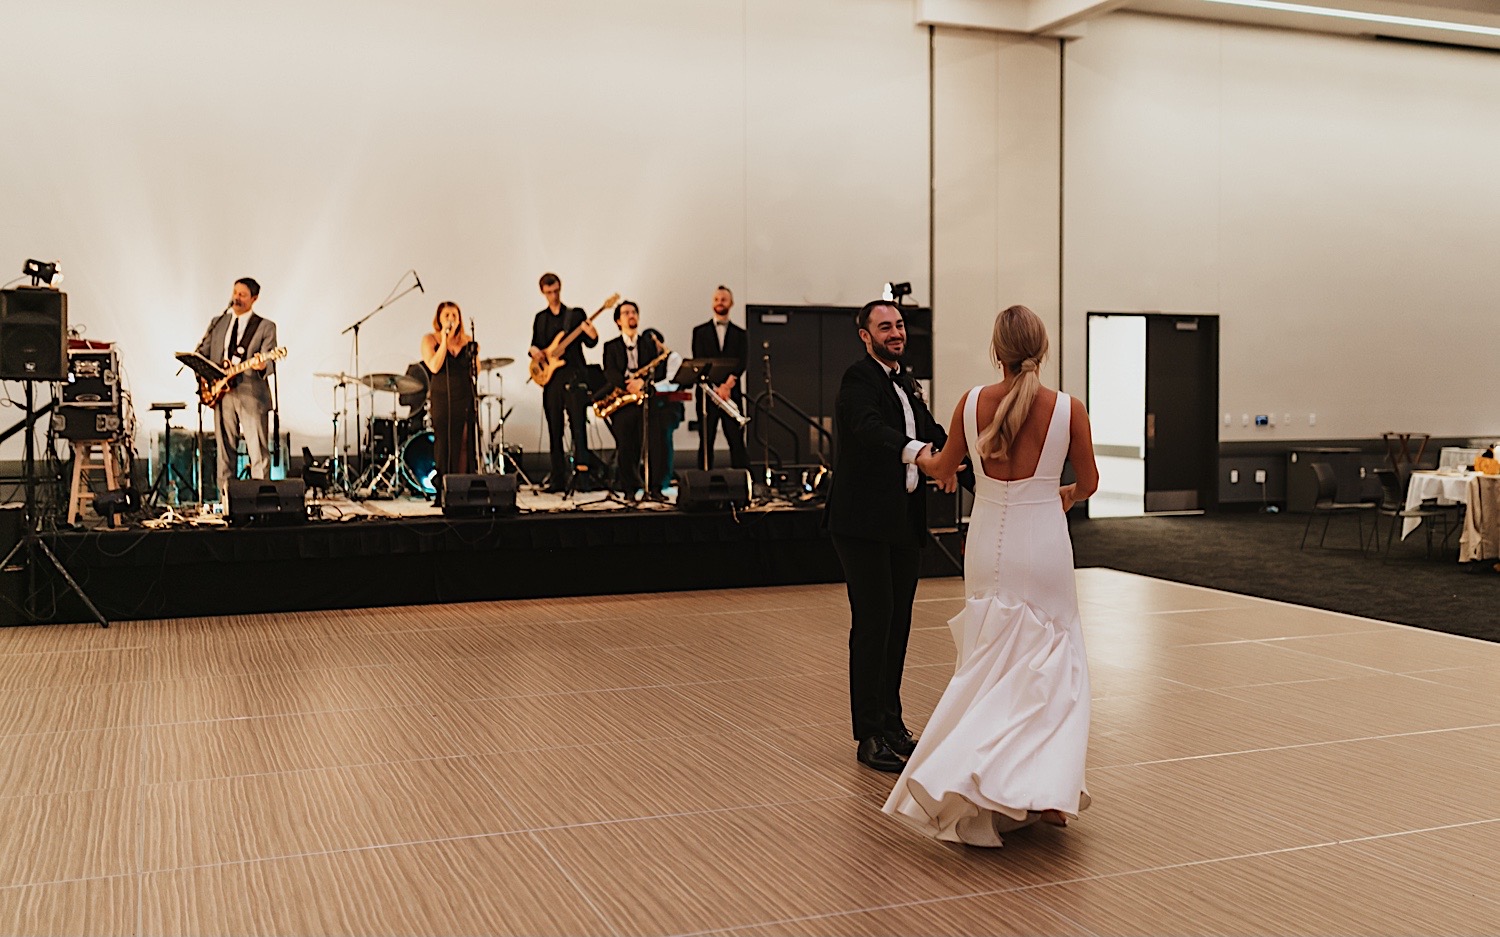 A bride and groom share their first dance during their wedding reception at the La Crosse Center while their live band plays behind them